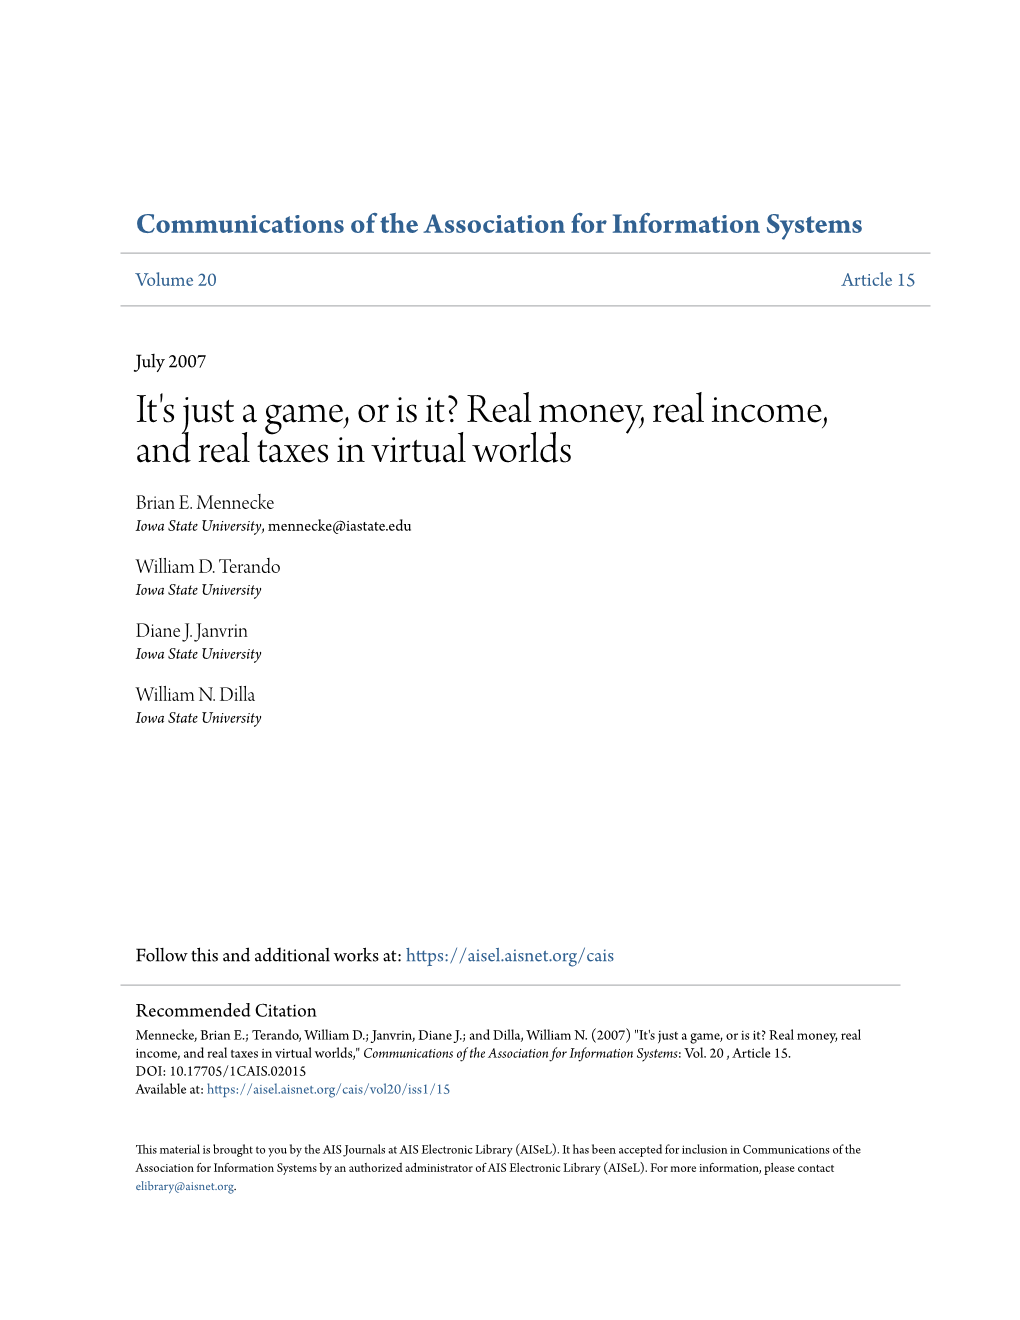 It's Just a Game, Or Is It? Real Money, Real Income, and Real Taxes in Virtual Worlds Brian E